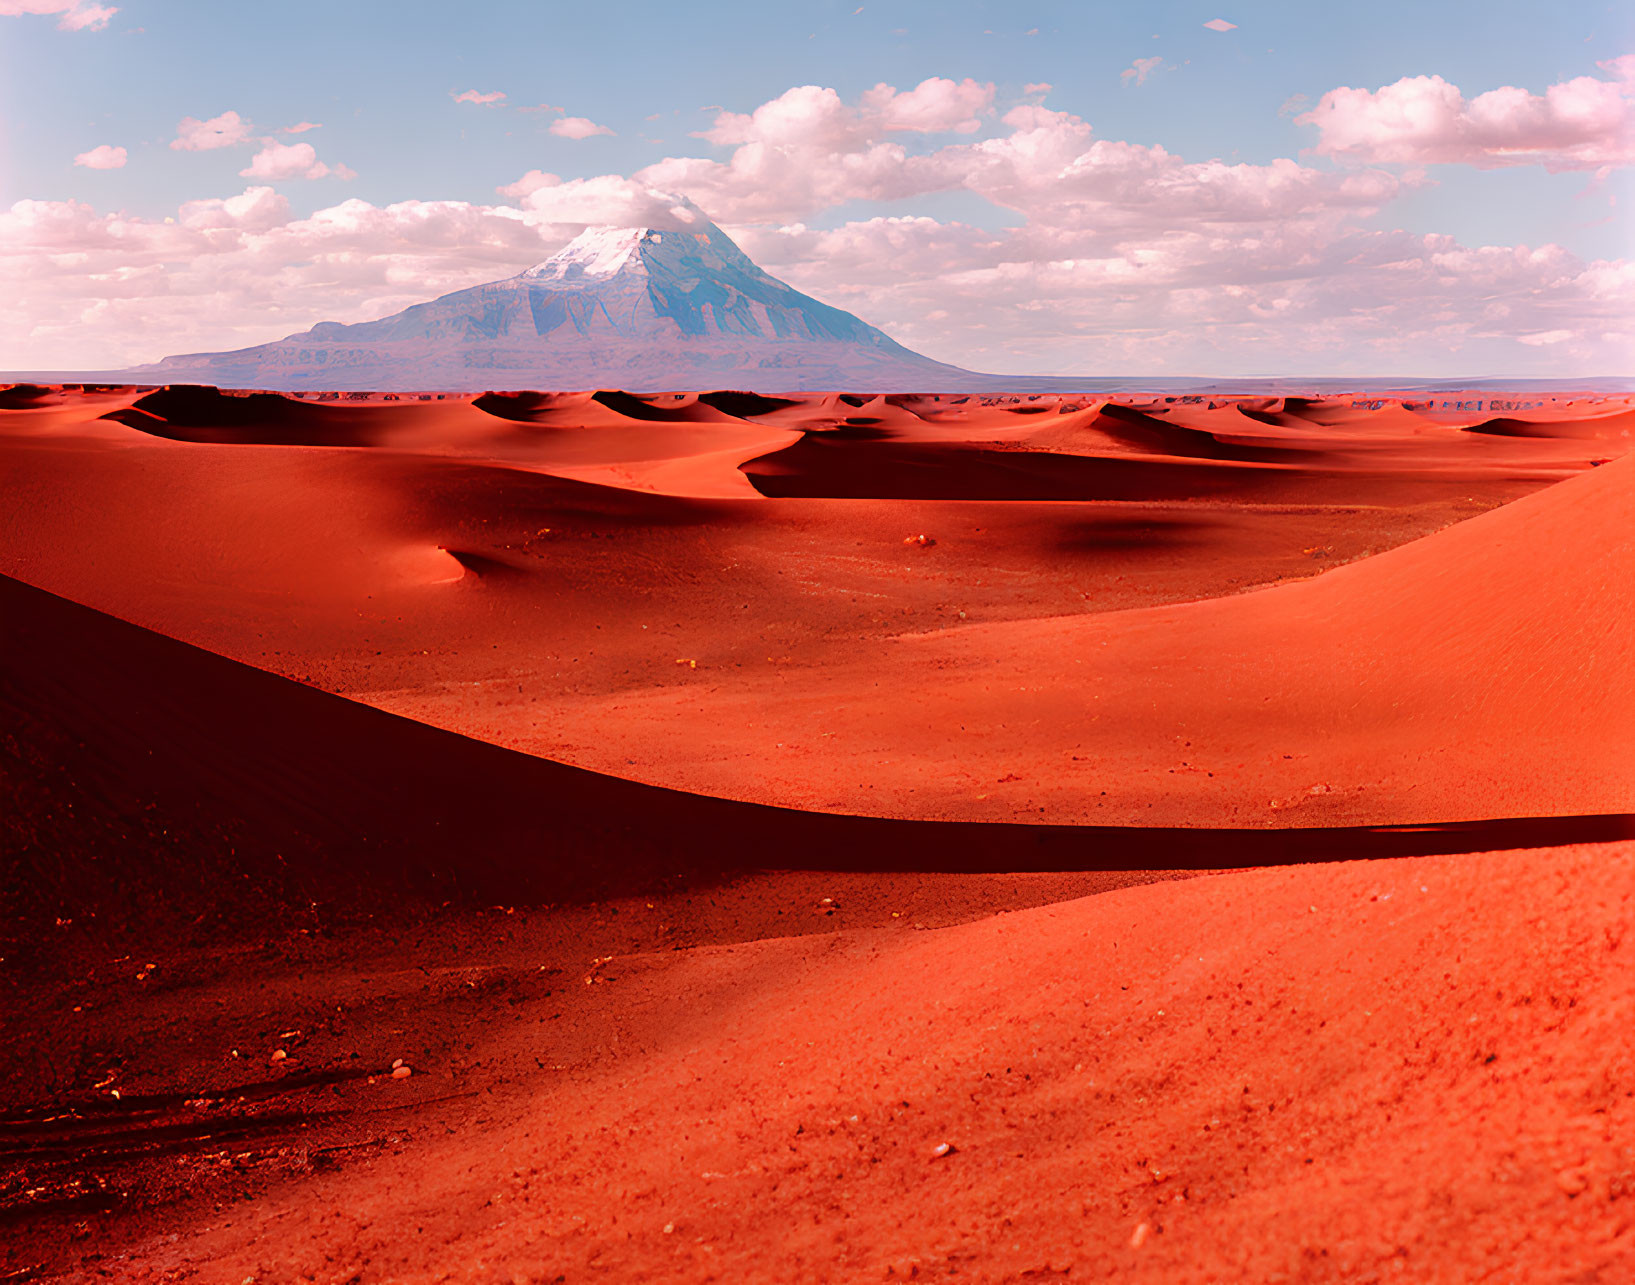 Scenic red sand desert with dunes and mountain landscape